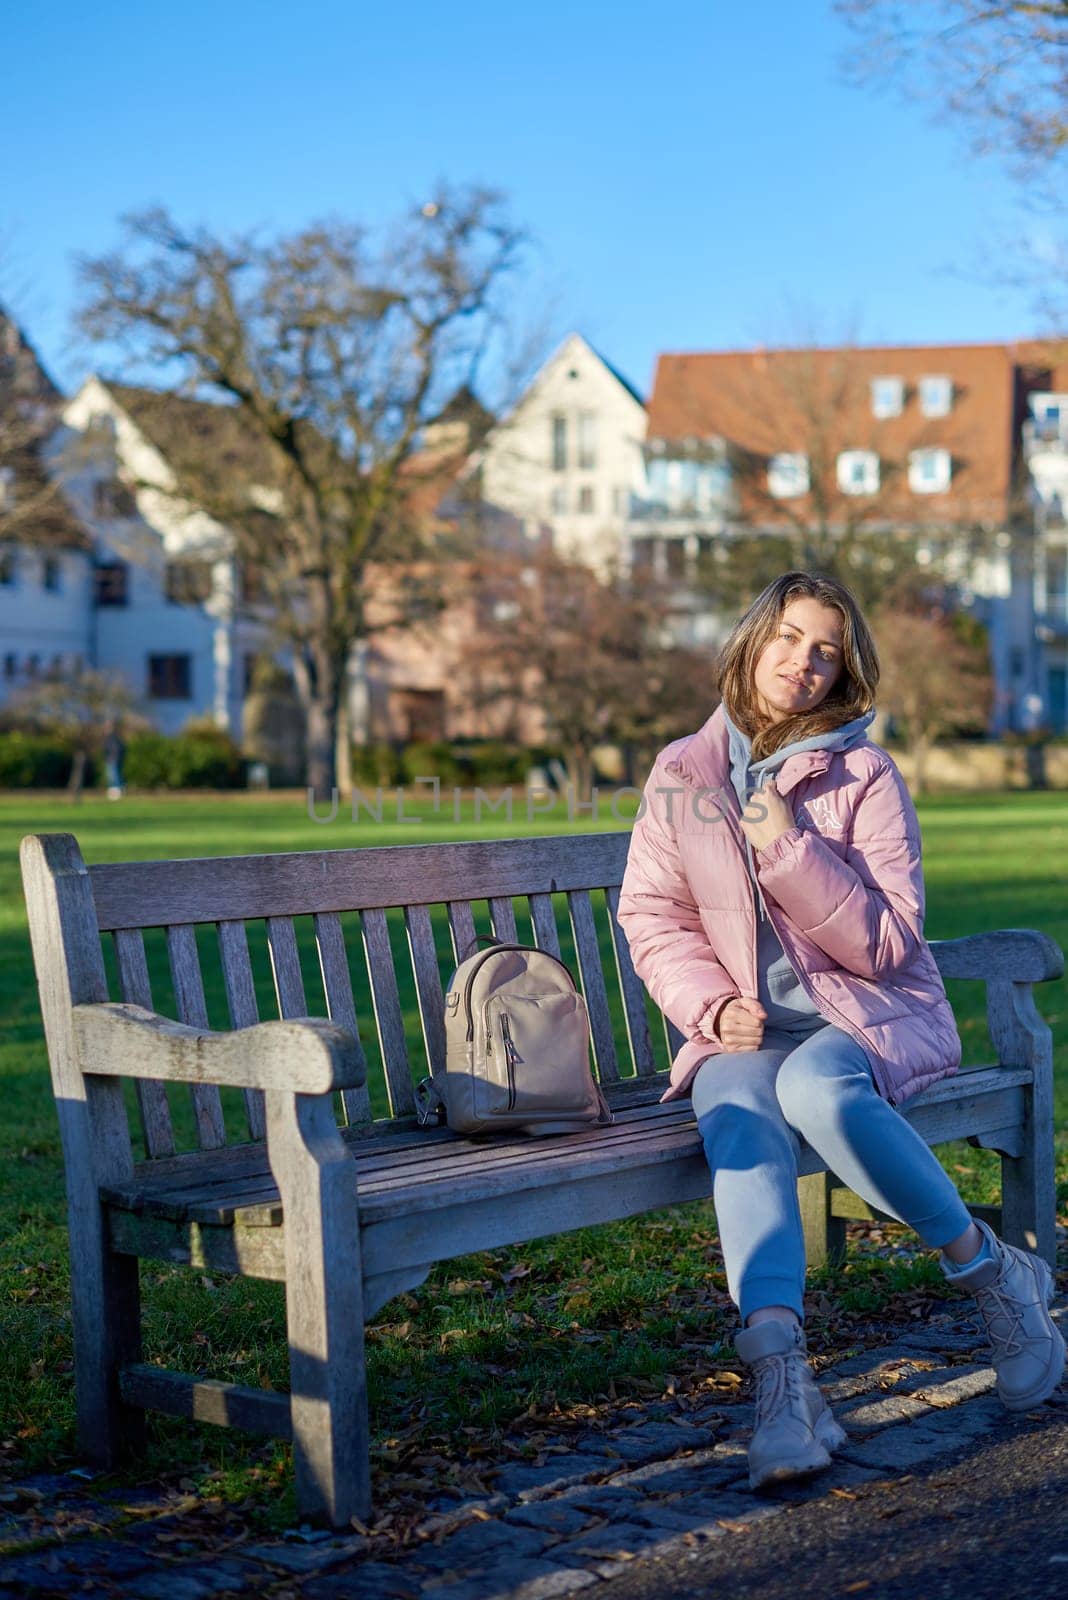 Embrace the tranquility of winter with this captivating image featuring a beautiful girl in a pink winter jacket, leisurely sitting on a bench in a park against the backdrop of a charming old European town. The photograph beautifully captures the serene atmosphere, blending the girl's winter style with the timeless charm of the historic surroundings. Winter Wonderland Elegance: Beautiful Girl in Pink Jacket Enjoys Festive Atmosphere in Bitigheim-Bissingen Park. Experience the magic of the holiday season as a charming girl in a pink winter jacket sits on a bench in a park against the backdrop of the historic town of Bitigheim-Bissingen, Baden-Württemberg, Germany. The scene is adorned with picturesque half-timbered houses, creating a delightful blend of winter charm and architectural beauty.